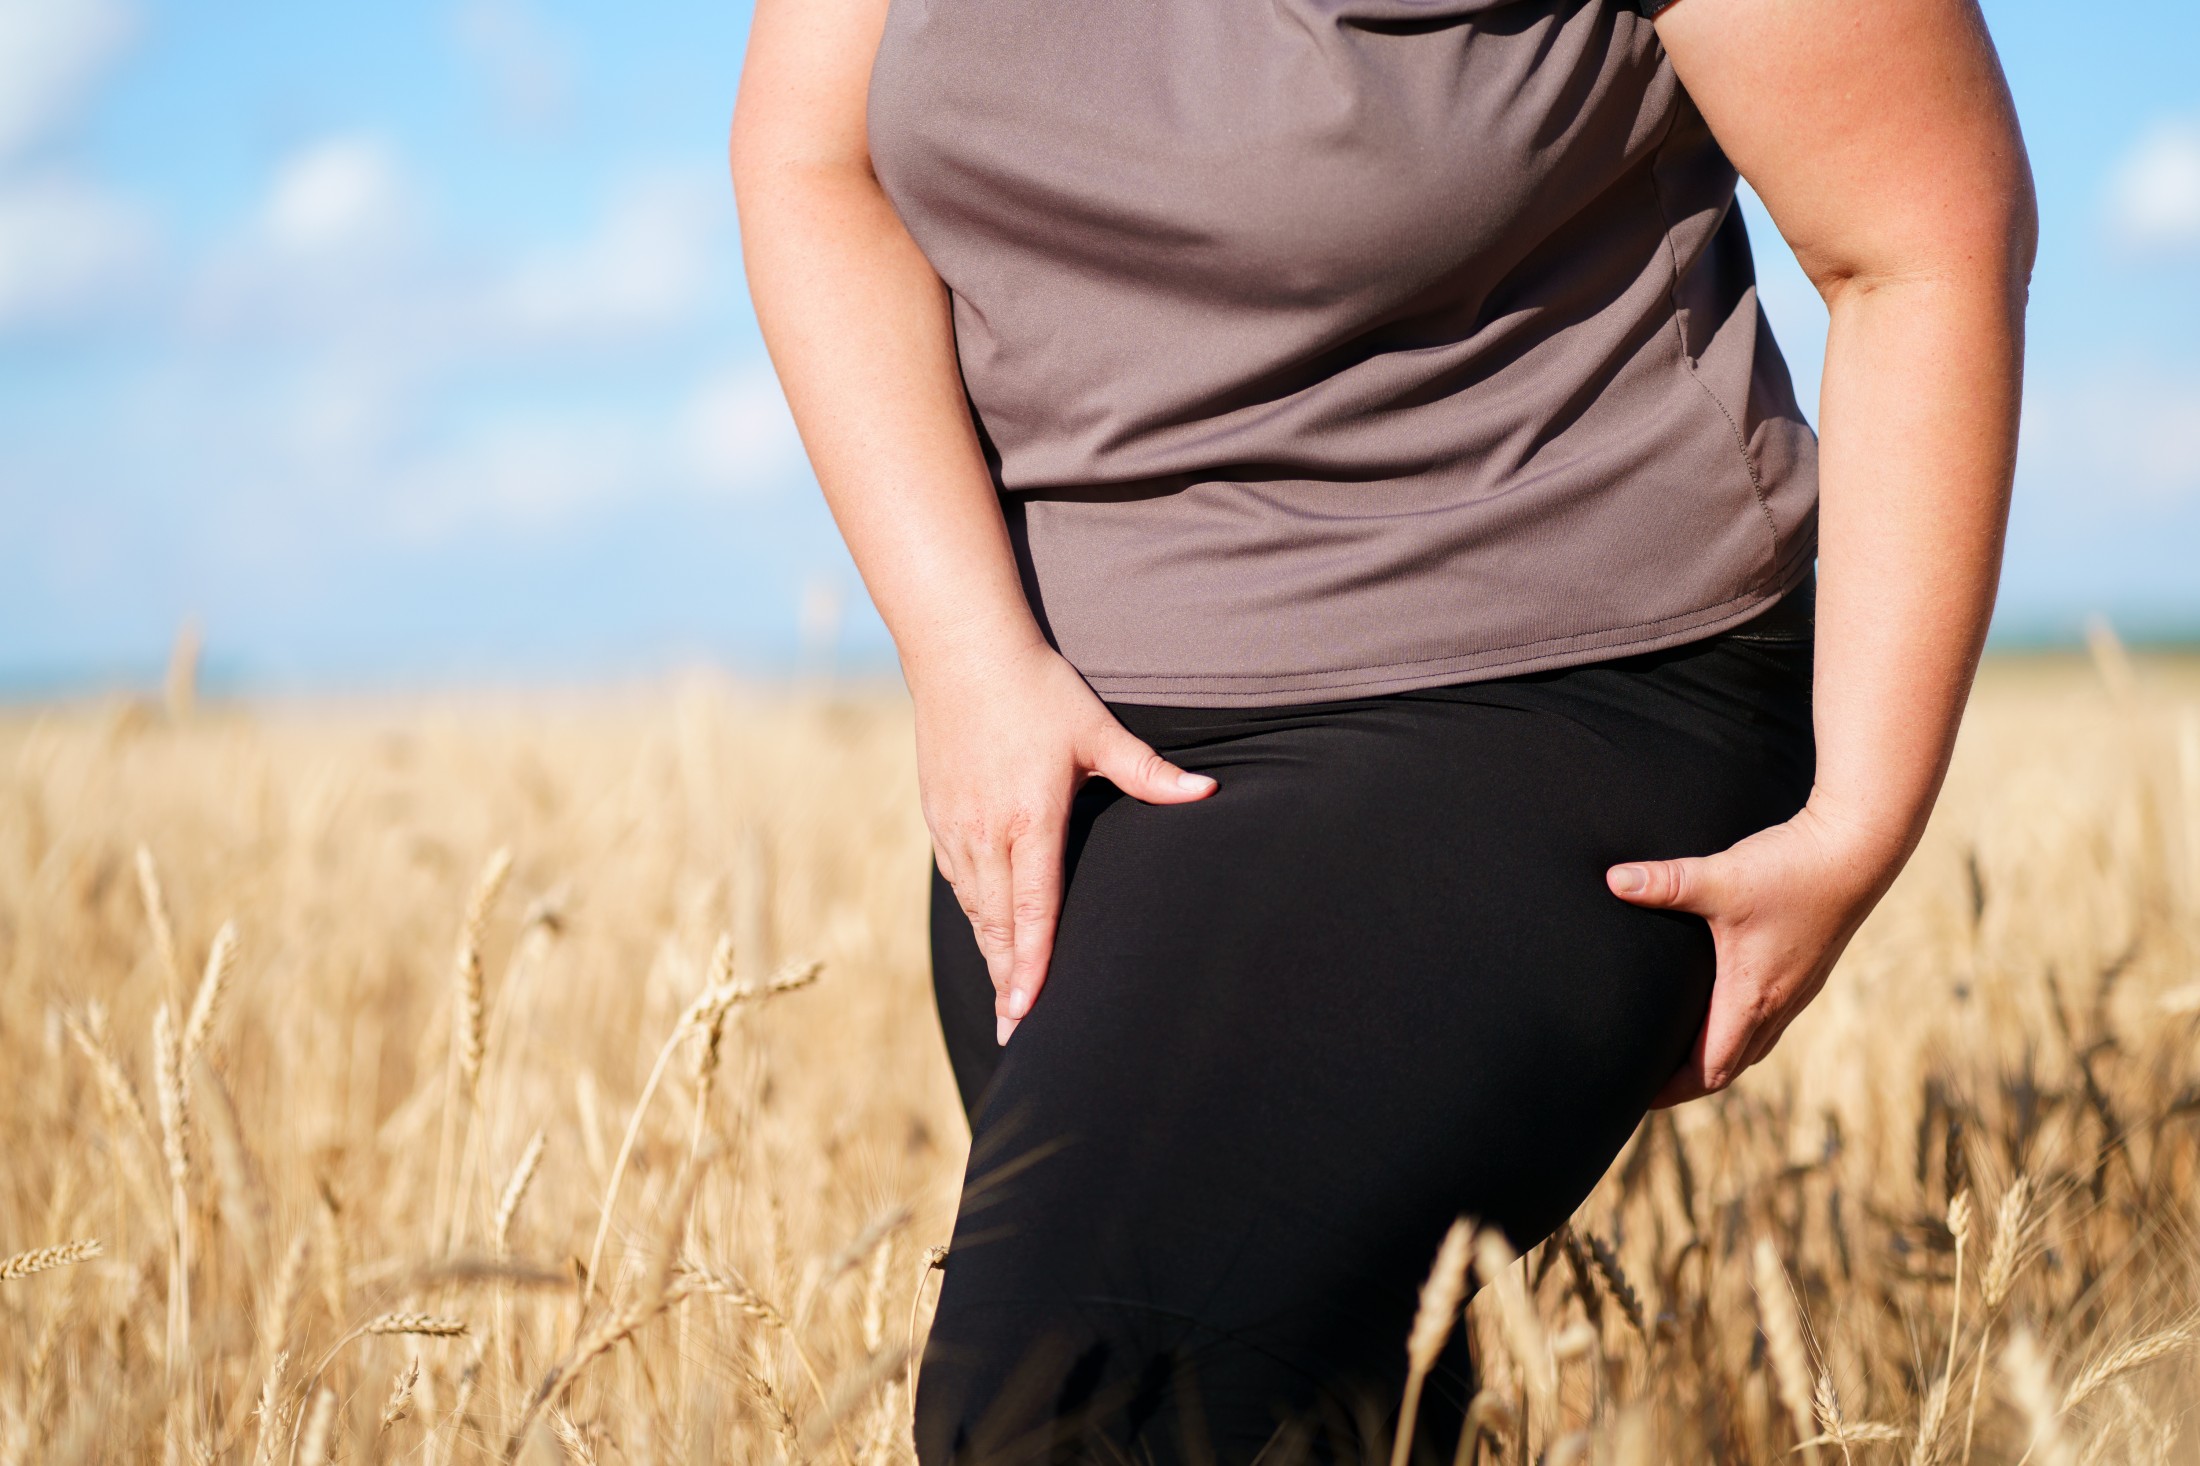 Most Commonly Experienced Mobility Issues Caused by Lipedema